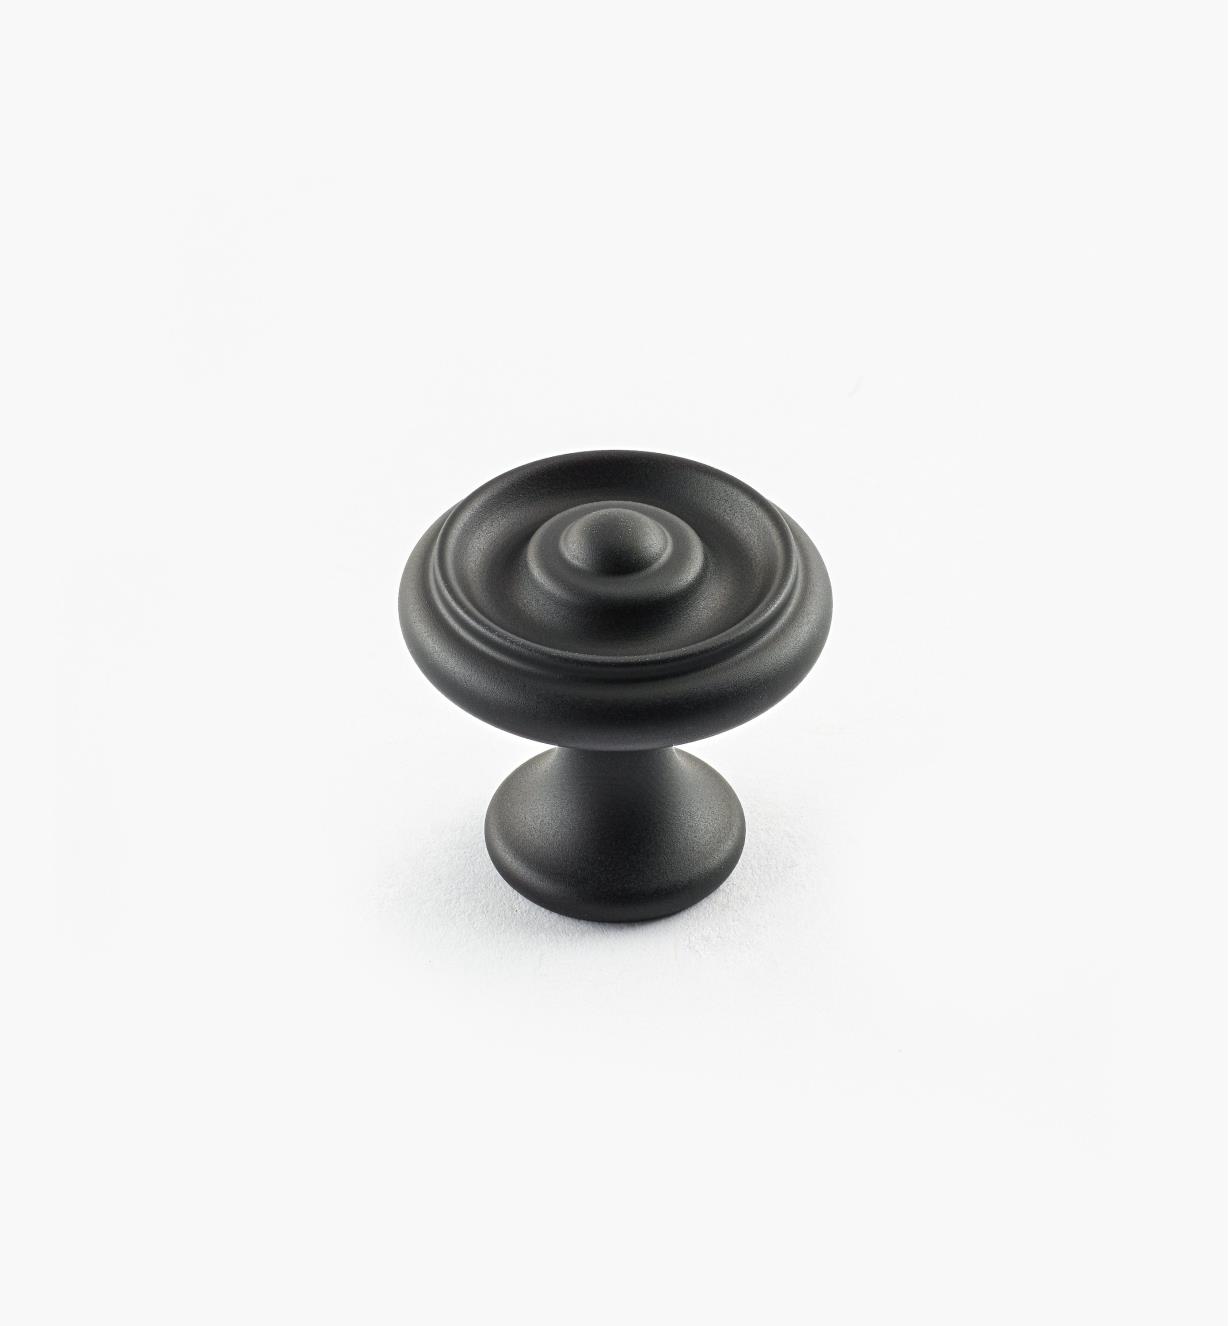 02W3240 - Oil-Rubbed Bronze Suite - 1" x 7/8" Turned Brass Raised Knob